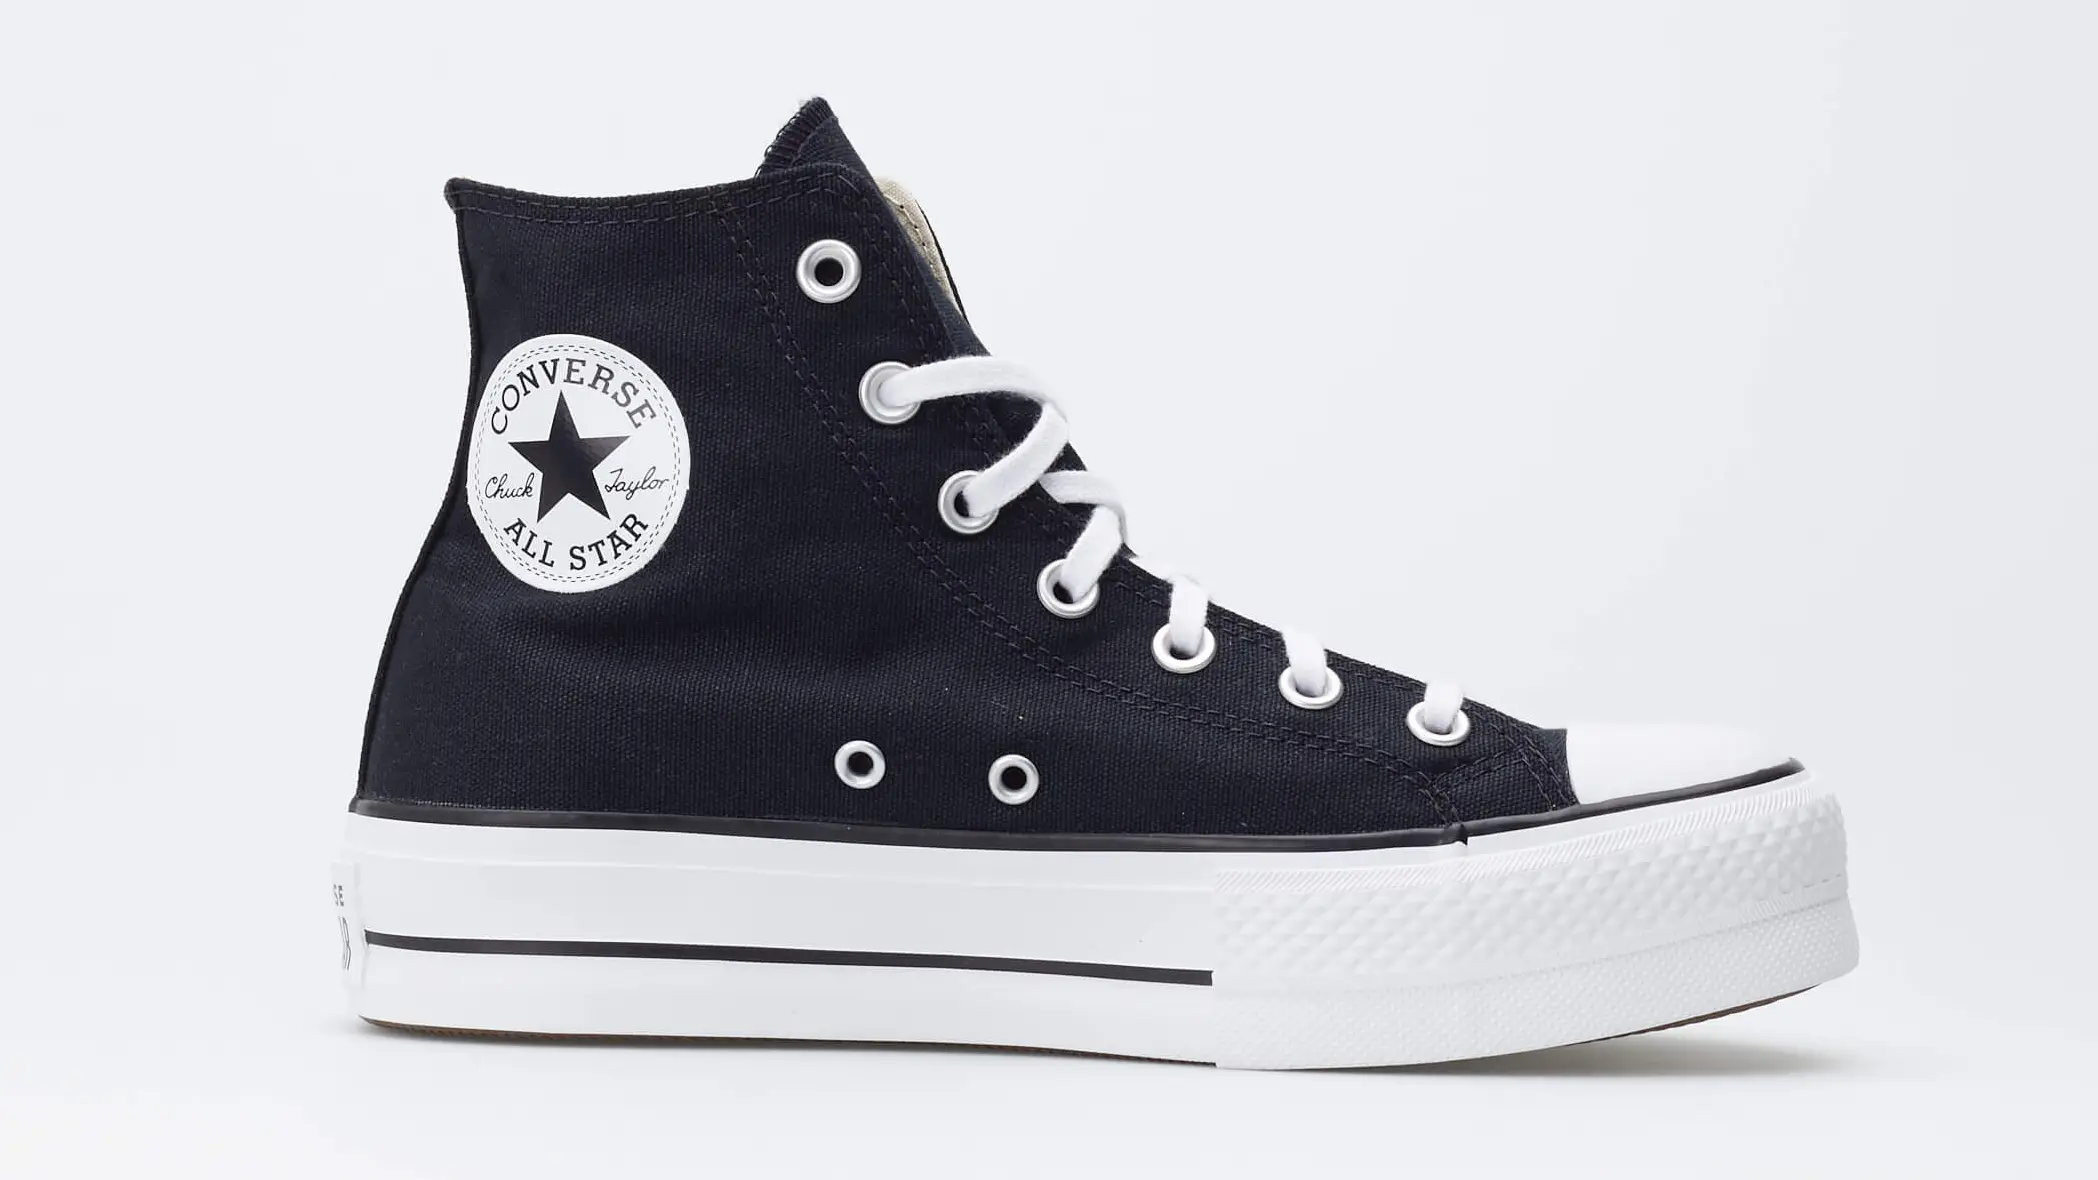 Platform Sneakers from Converse You Won't Be Able to Resist | The Sole ...